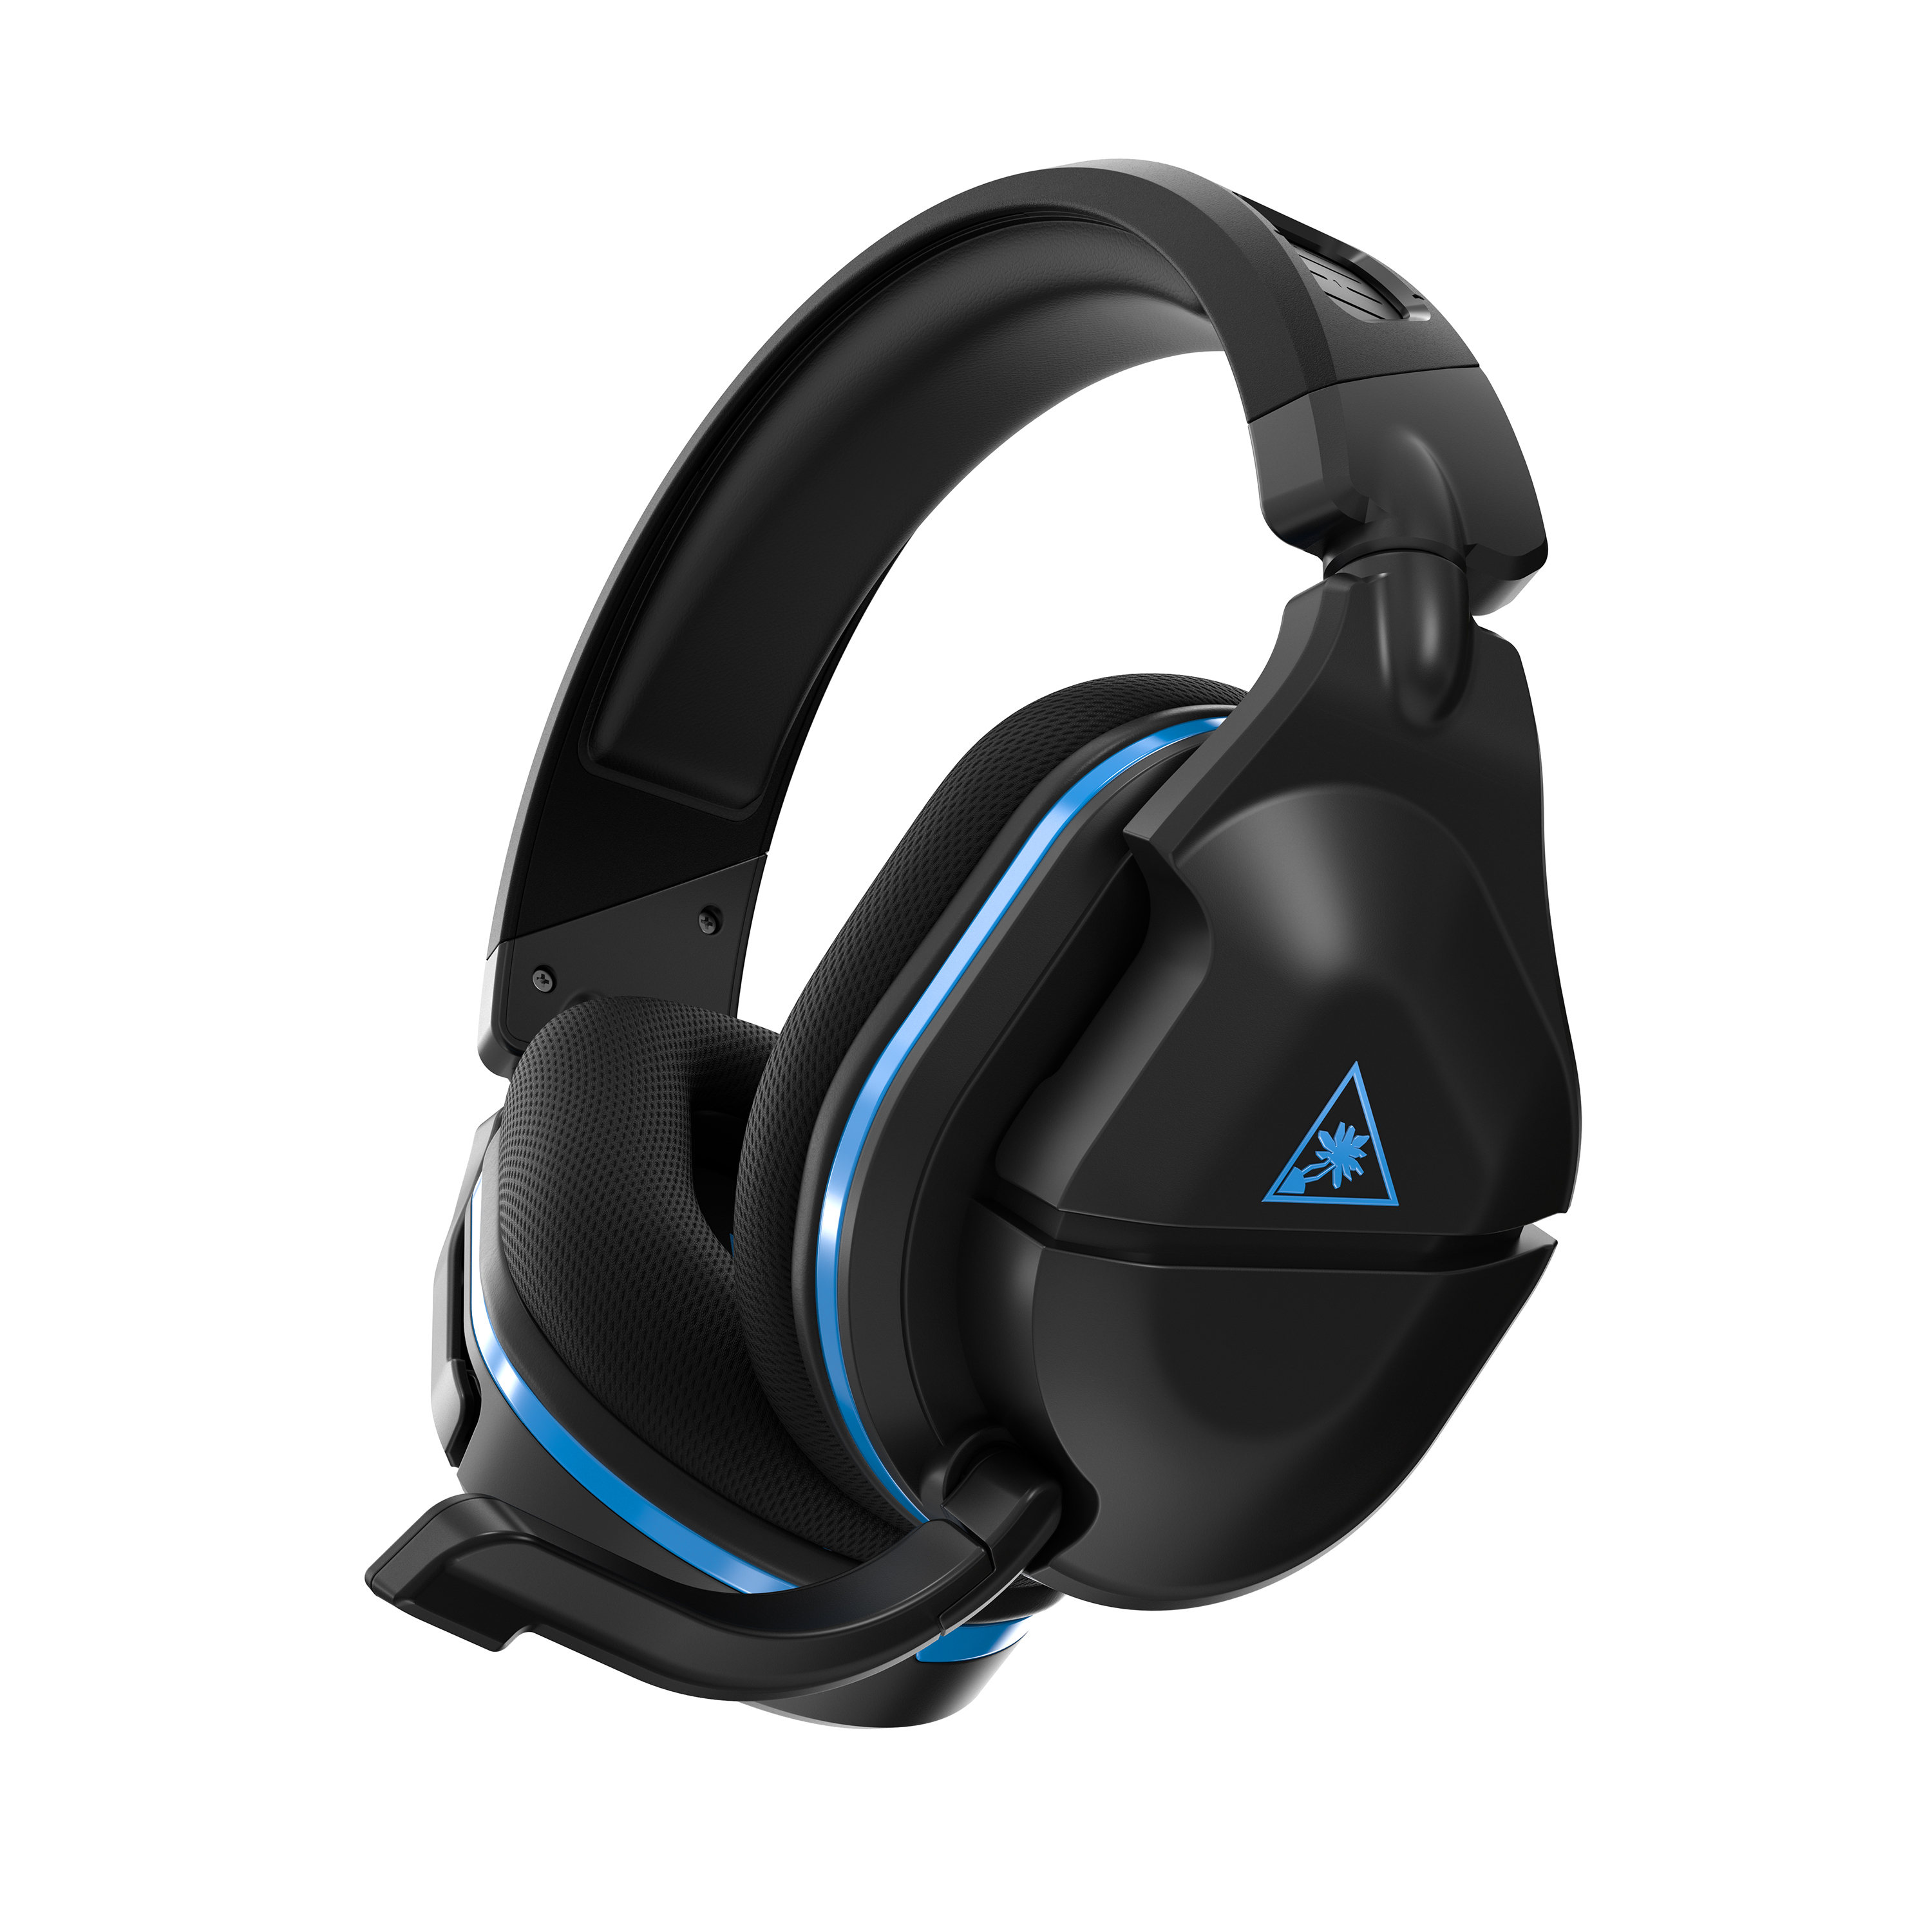 TURTLE BEACH Stealth Gen 2 600P Black TBS-3140-02 Wireless Headset for PS4/PS5